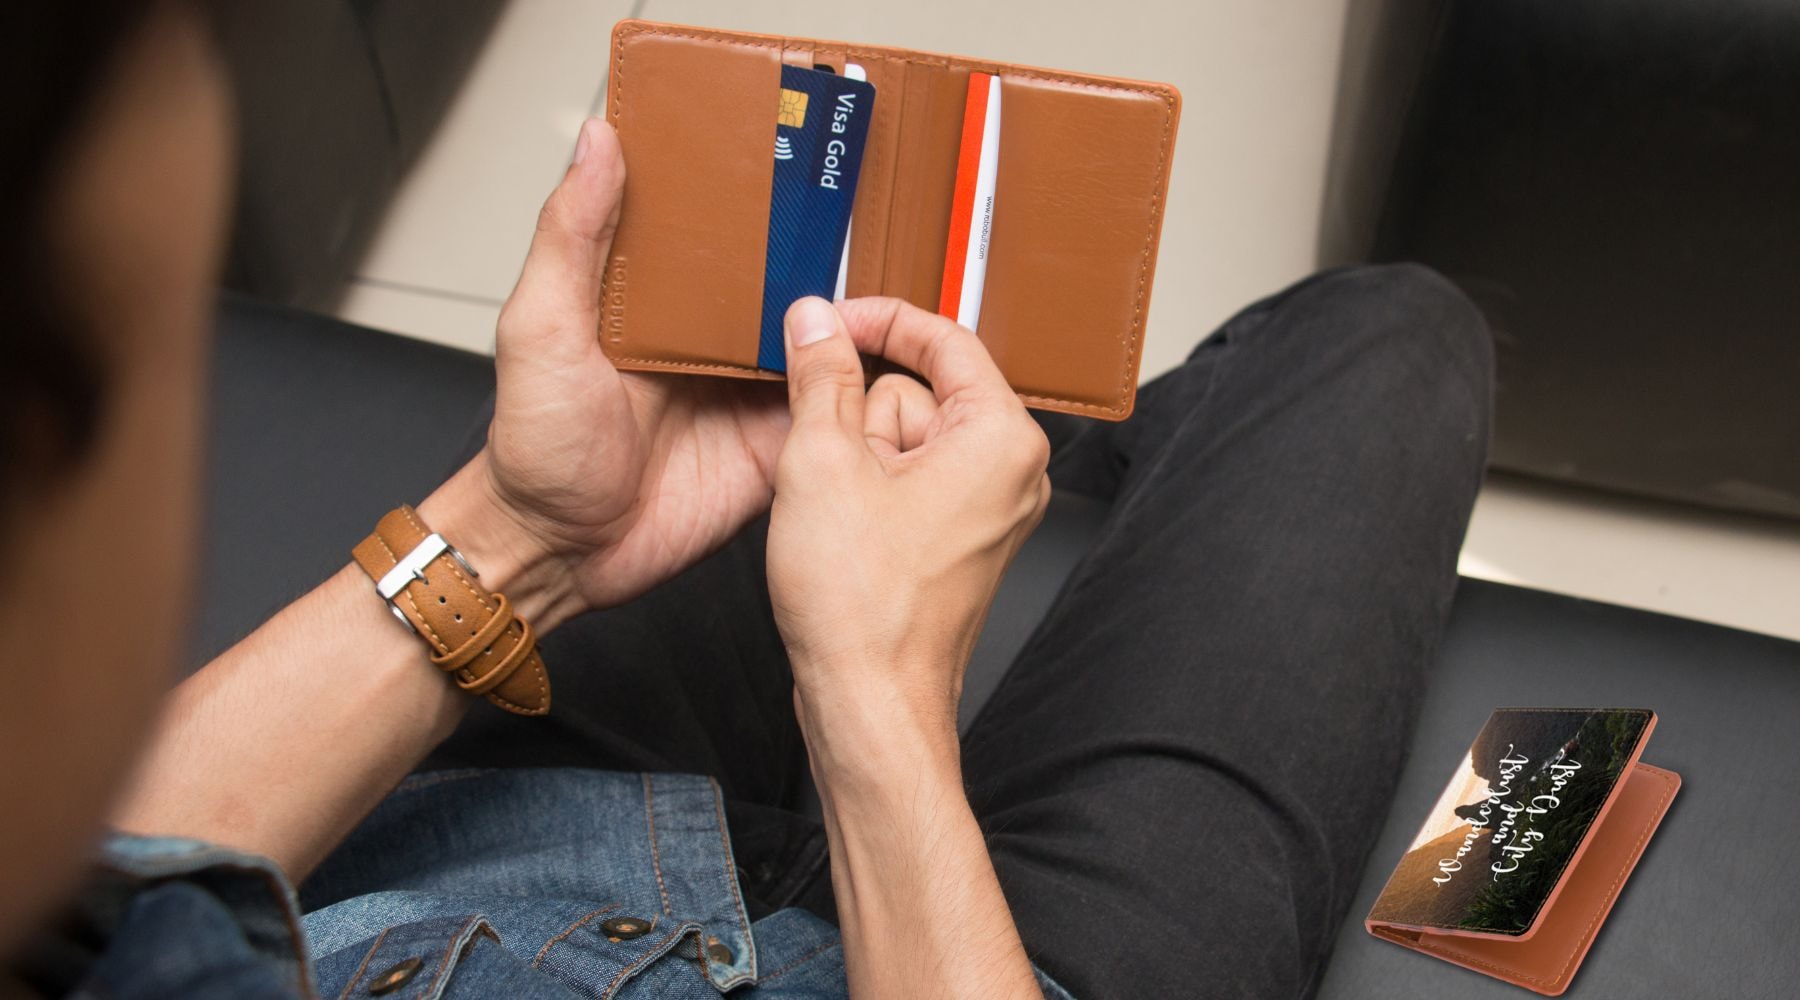 Young man examining multiple credit cards in a brown leather wallet.